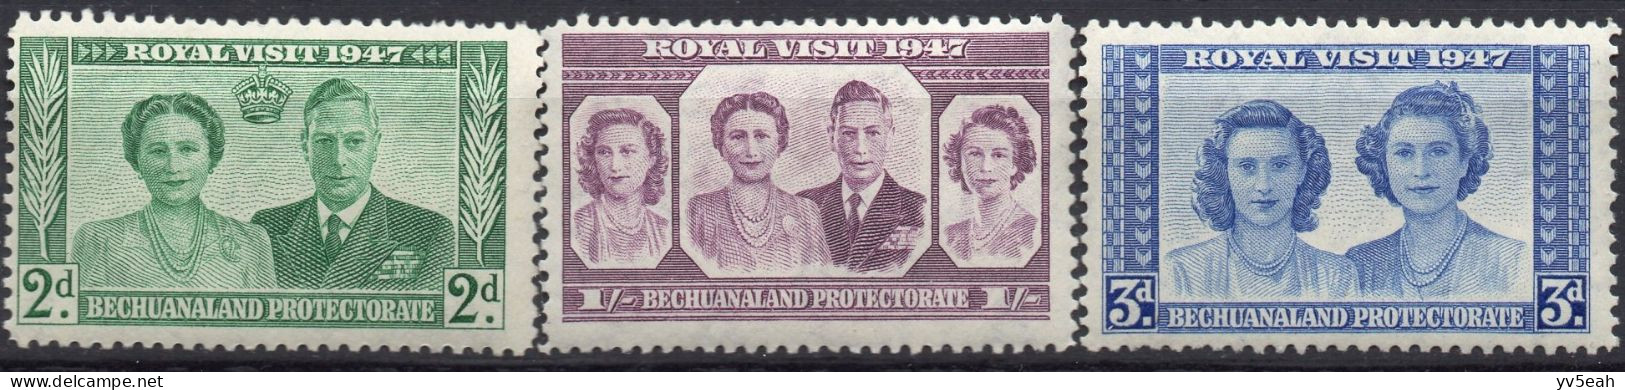 BECHUANALAND PROTECTORATE/1947/MNH/SC#144-6/KING GEORGE VI/ KGVI /ROYAL FAMILY VISIT ISSUED / PARTIAL SET - 1885-1964 Bechuanaland Protectorate